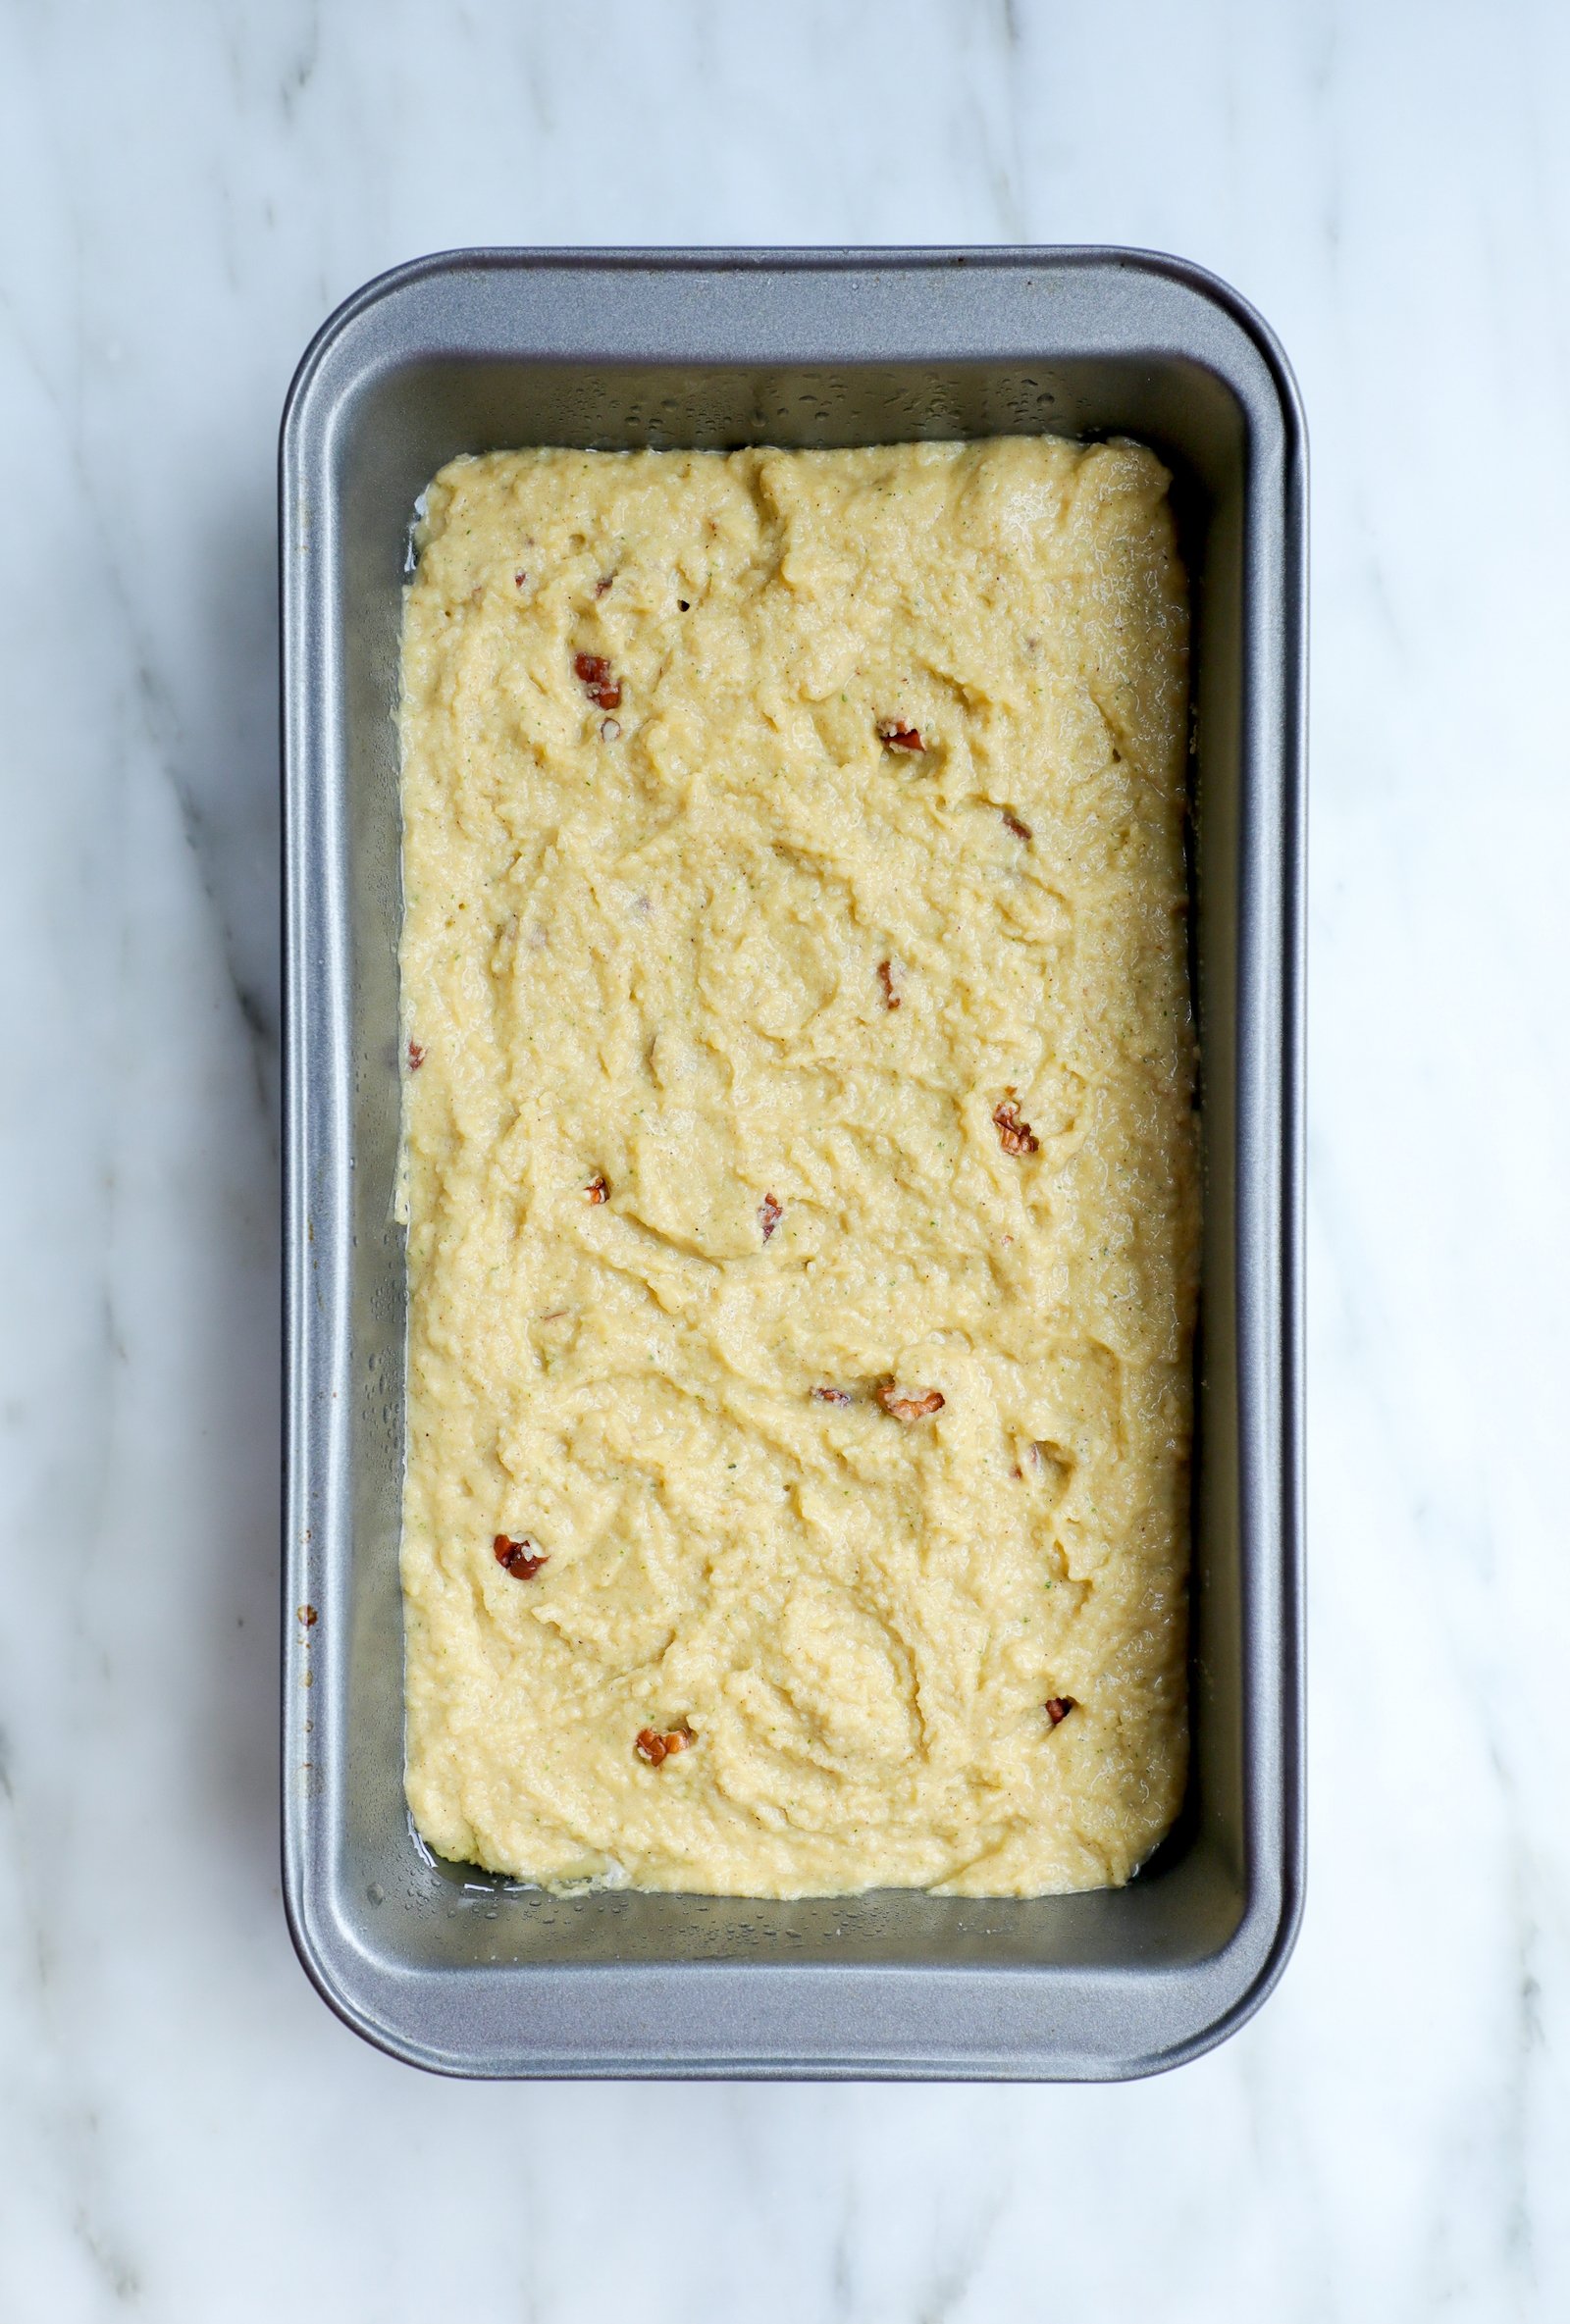 Bread pan with keto zucchini bread batter before baking